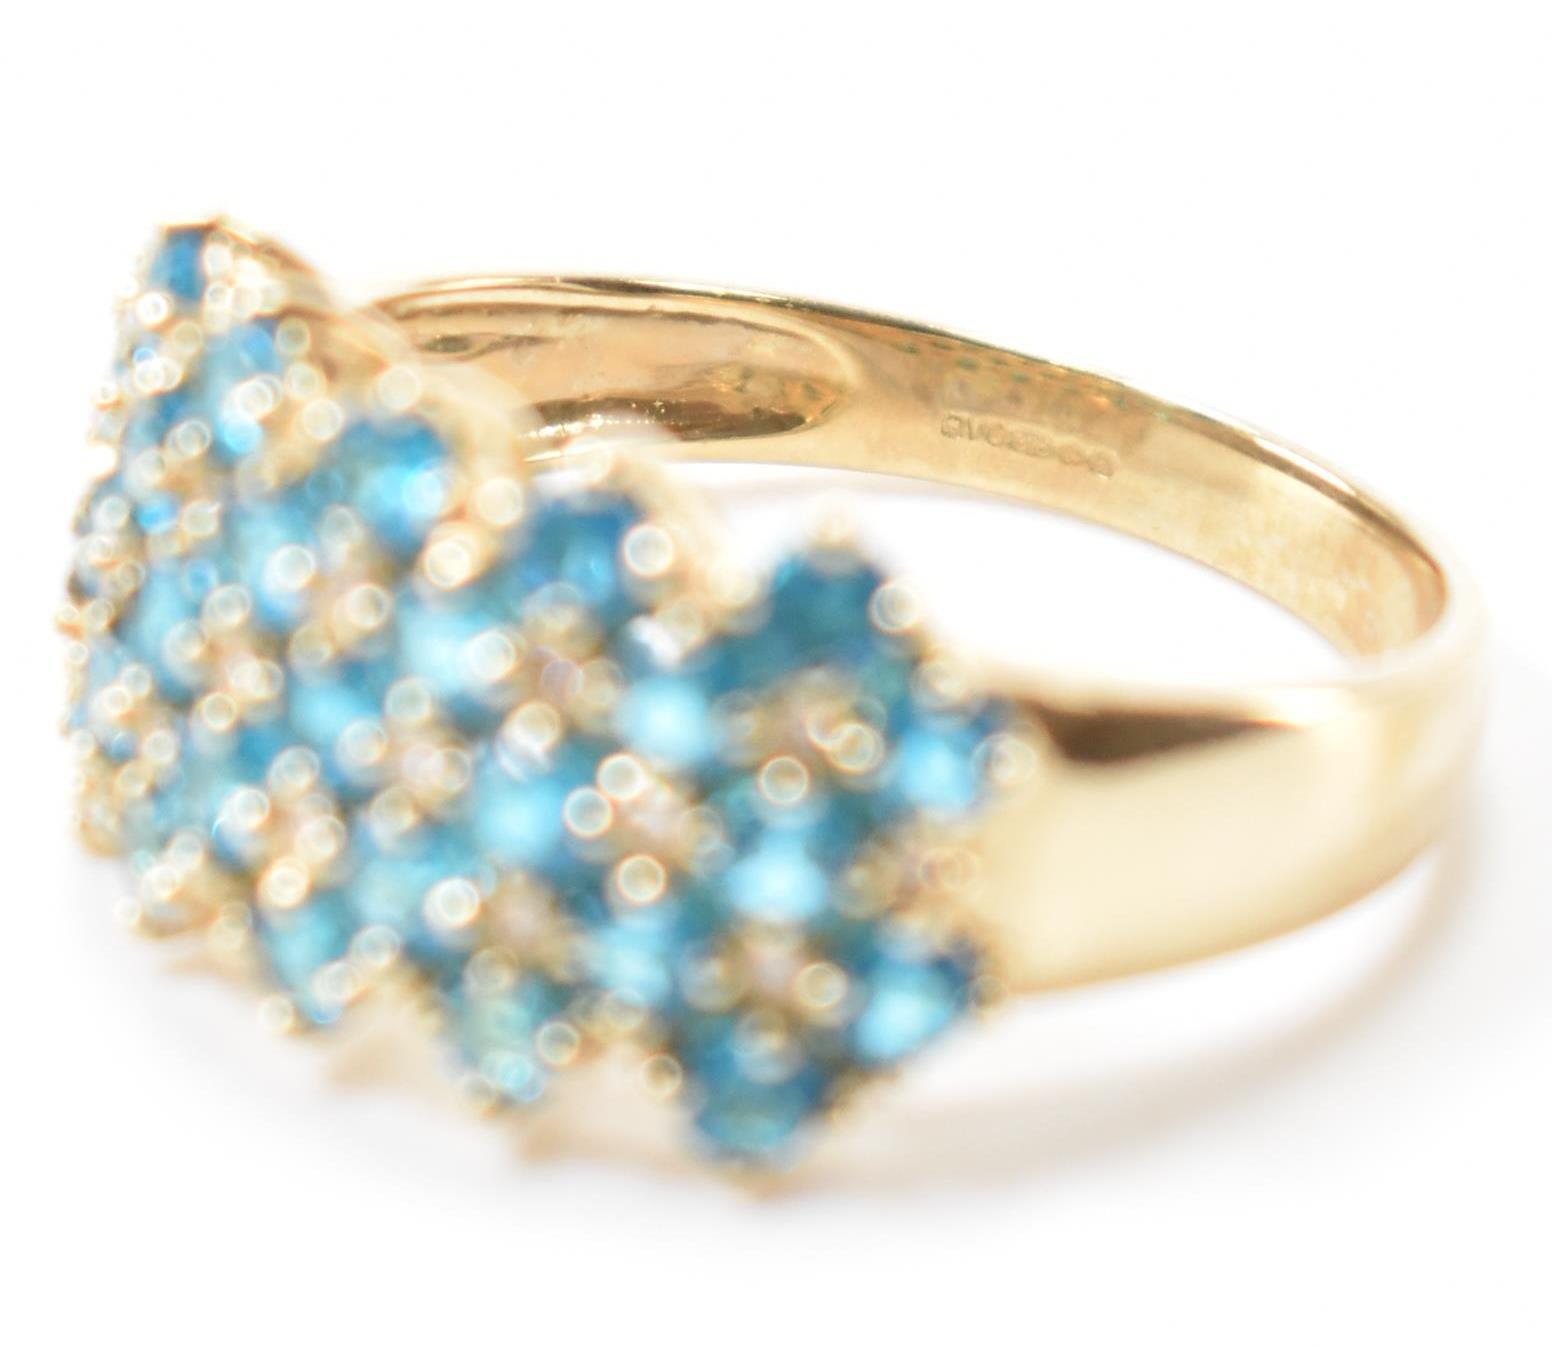 HALLMARKED 9CT GOLD DIAMOND & BLUE STONE CLUSTER RING - Image 7 of 9